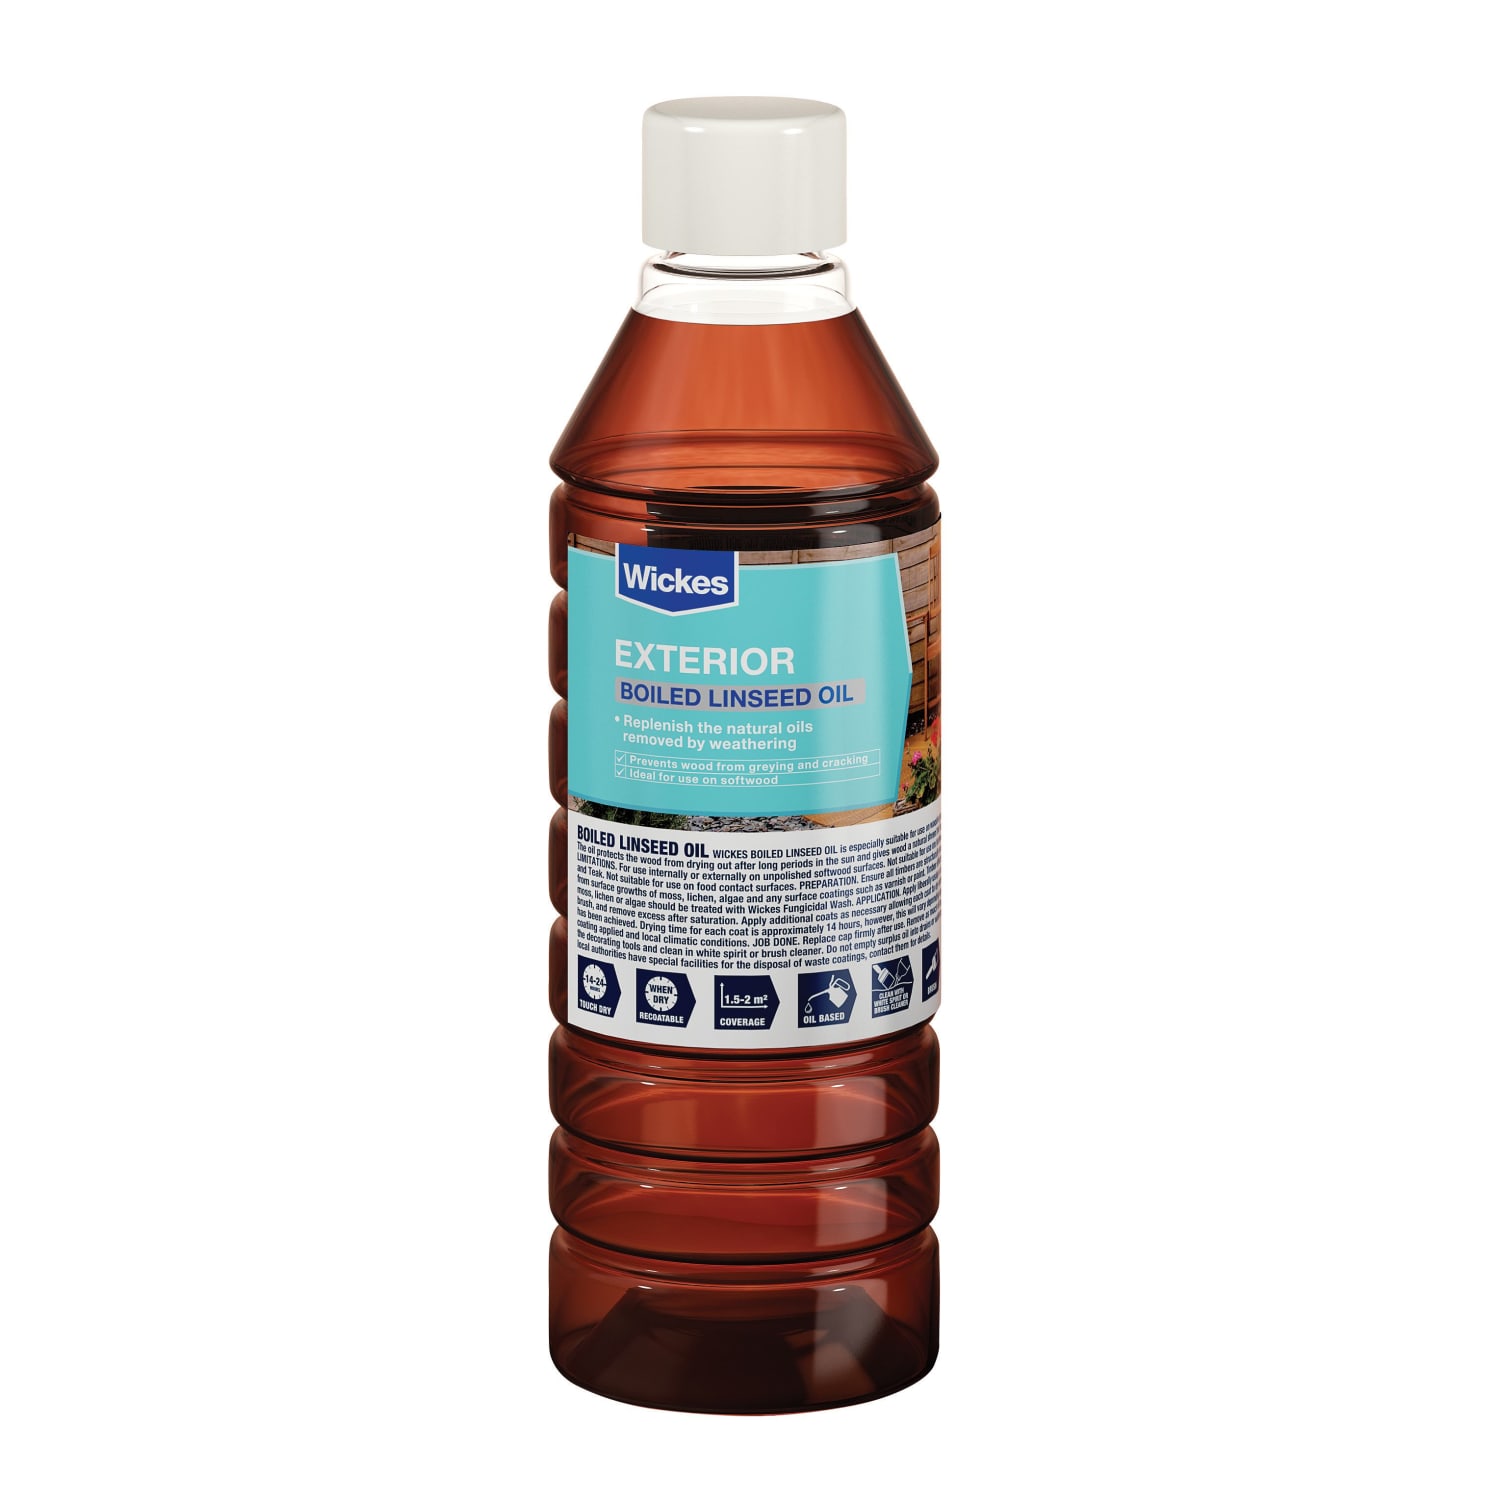 Boiled Linseed Oil (8.5 fl.oz. / 250ml) - Refined Oil for Wood Furniture